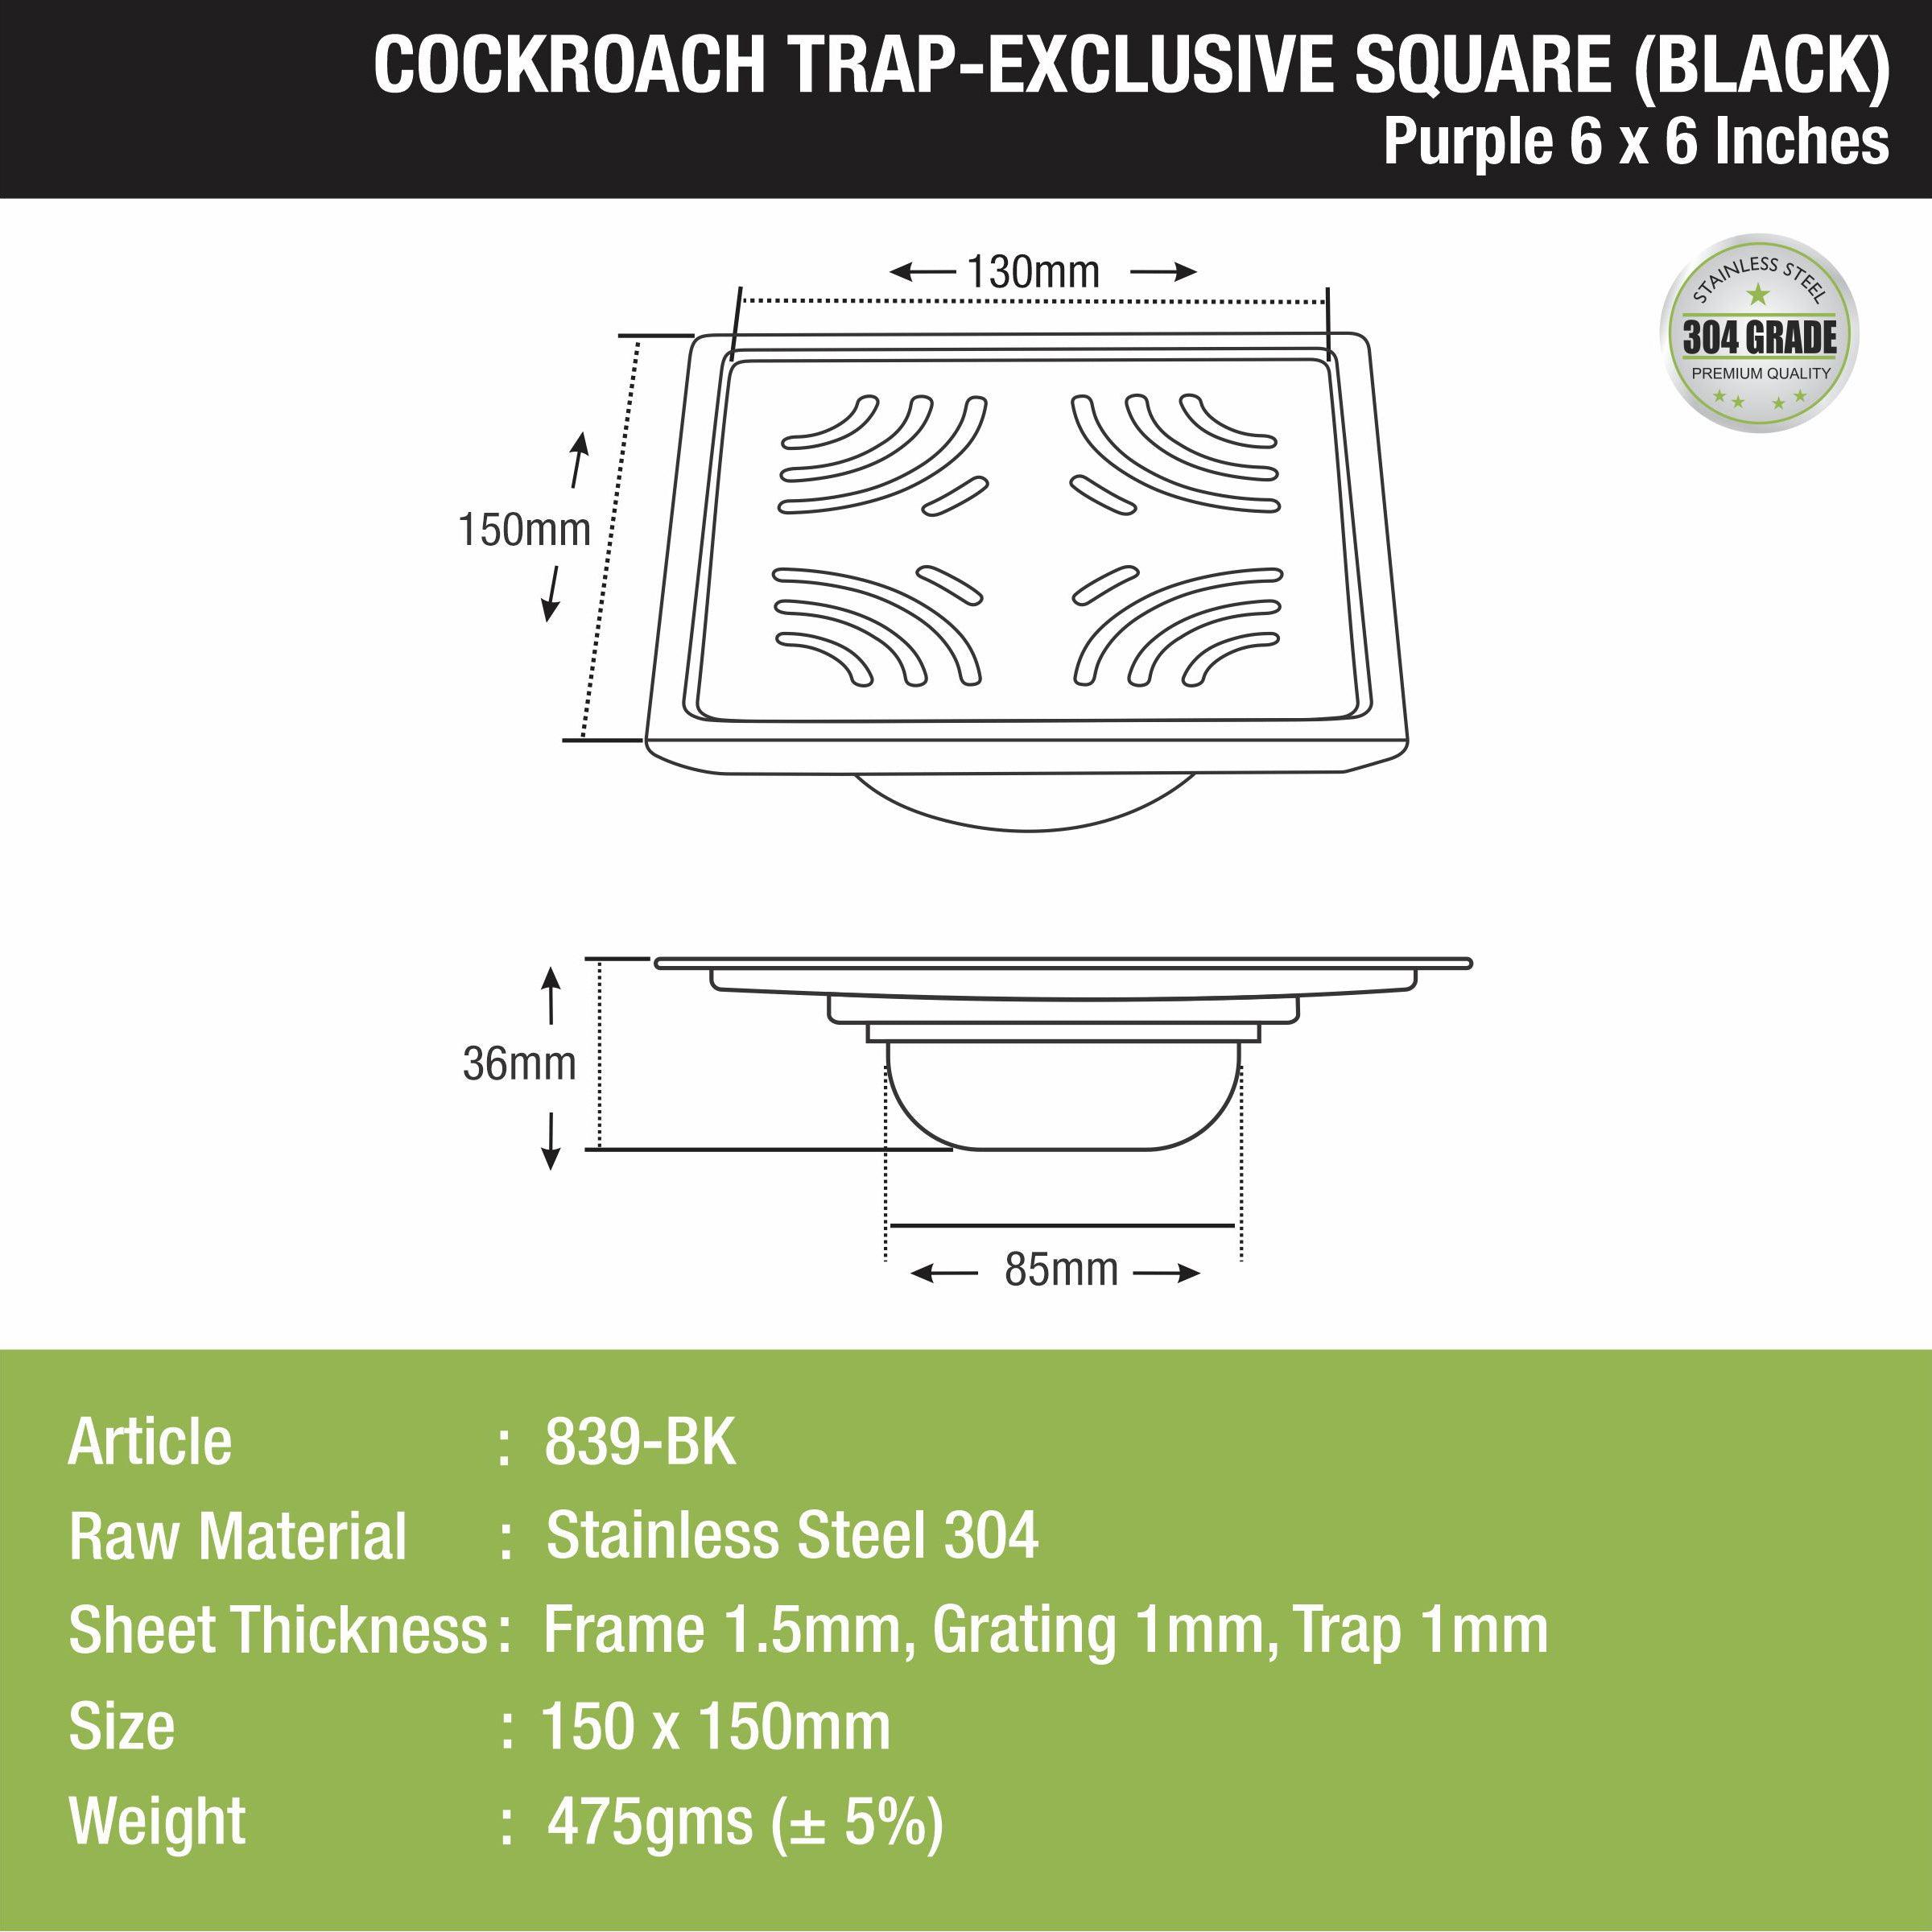 Purple Exclusive Square Floor Drain in Black PVD Coating (6 x 6 Inches) with Cockroach Trap size and measurement